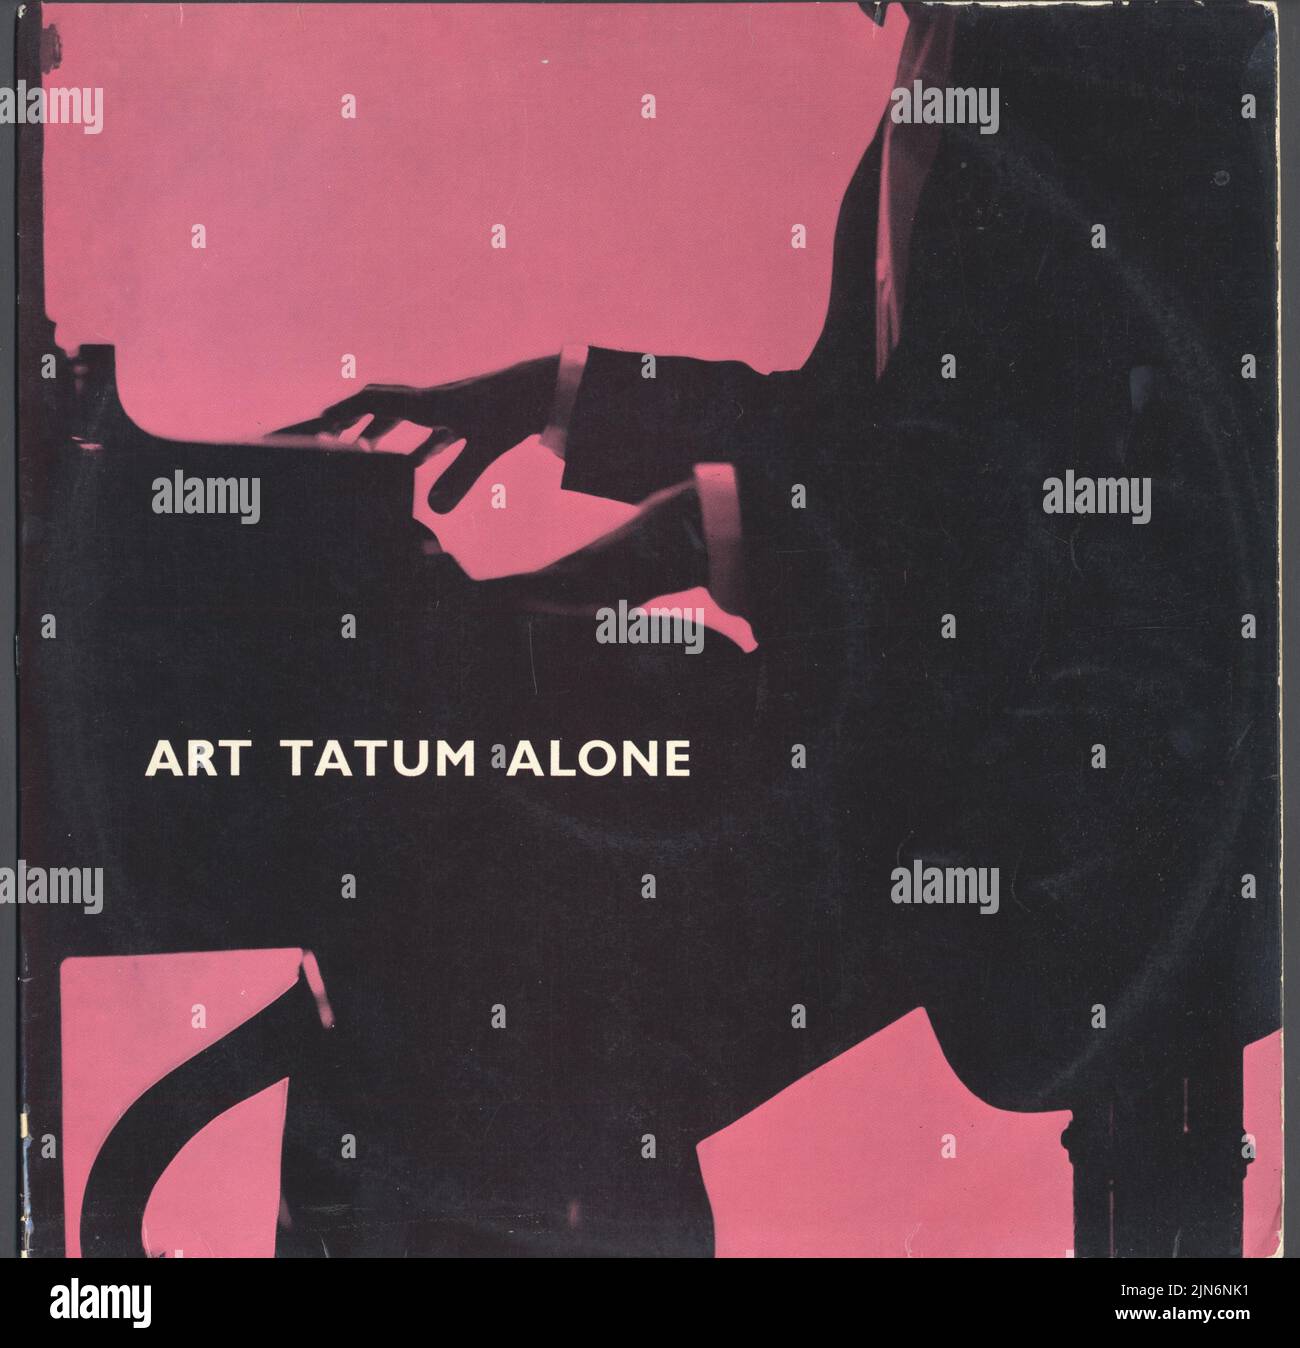 Art Tatum. Alone. LP vinyl World Record Club label. TP 226 scanned off sleeve. Reissue of an earlier album Discoveries, tapes made in 1956. This reissue 1962. Simple clever cover design from a busy budget mail order label. Piano jazz. Stock Photo